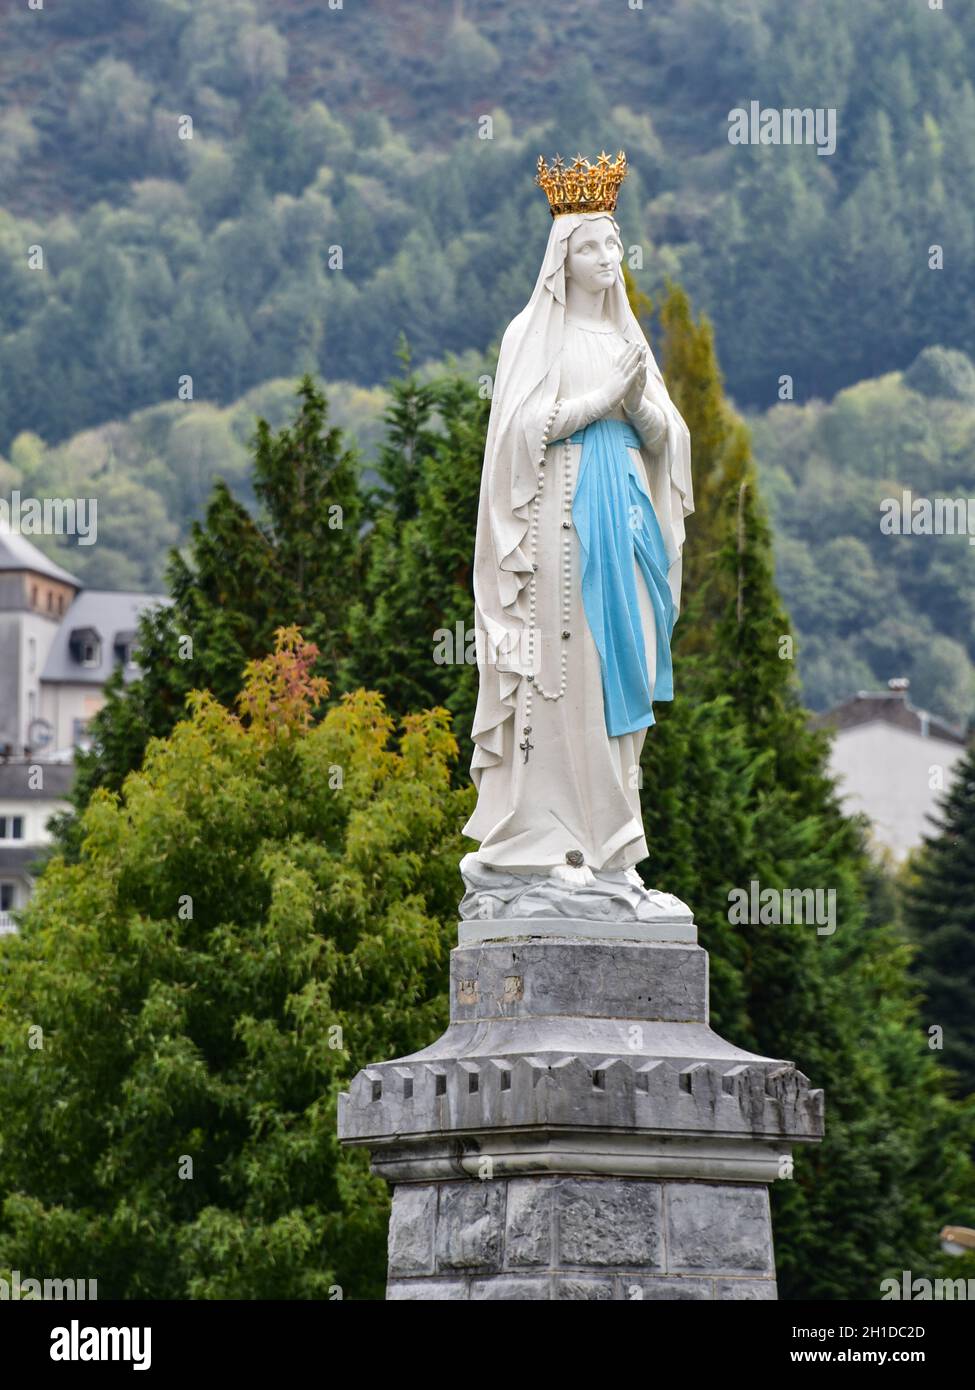 Lourdes, France - 9 Oct 2021: Statue of the Virgin Mary on the espanade of the Rosary Basilica Stock Photo